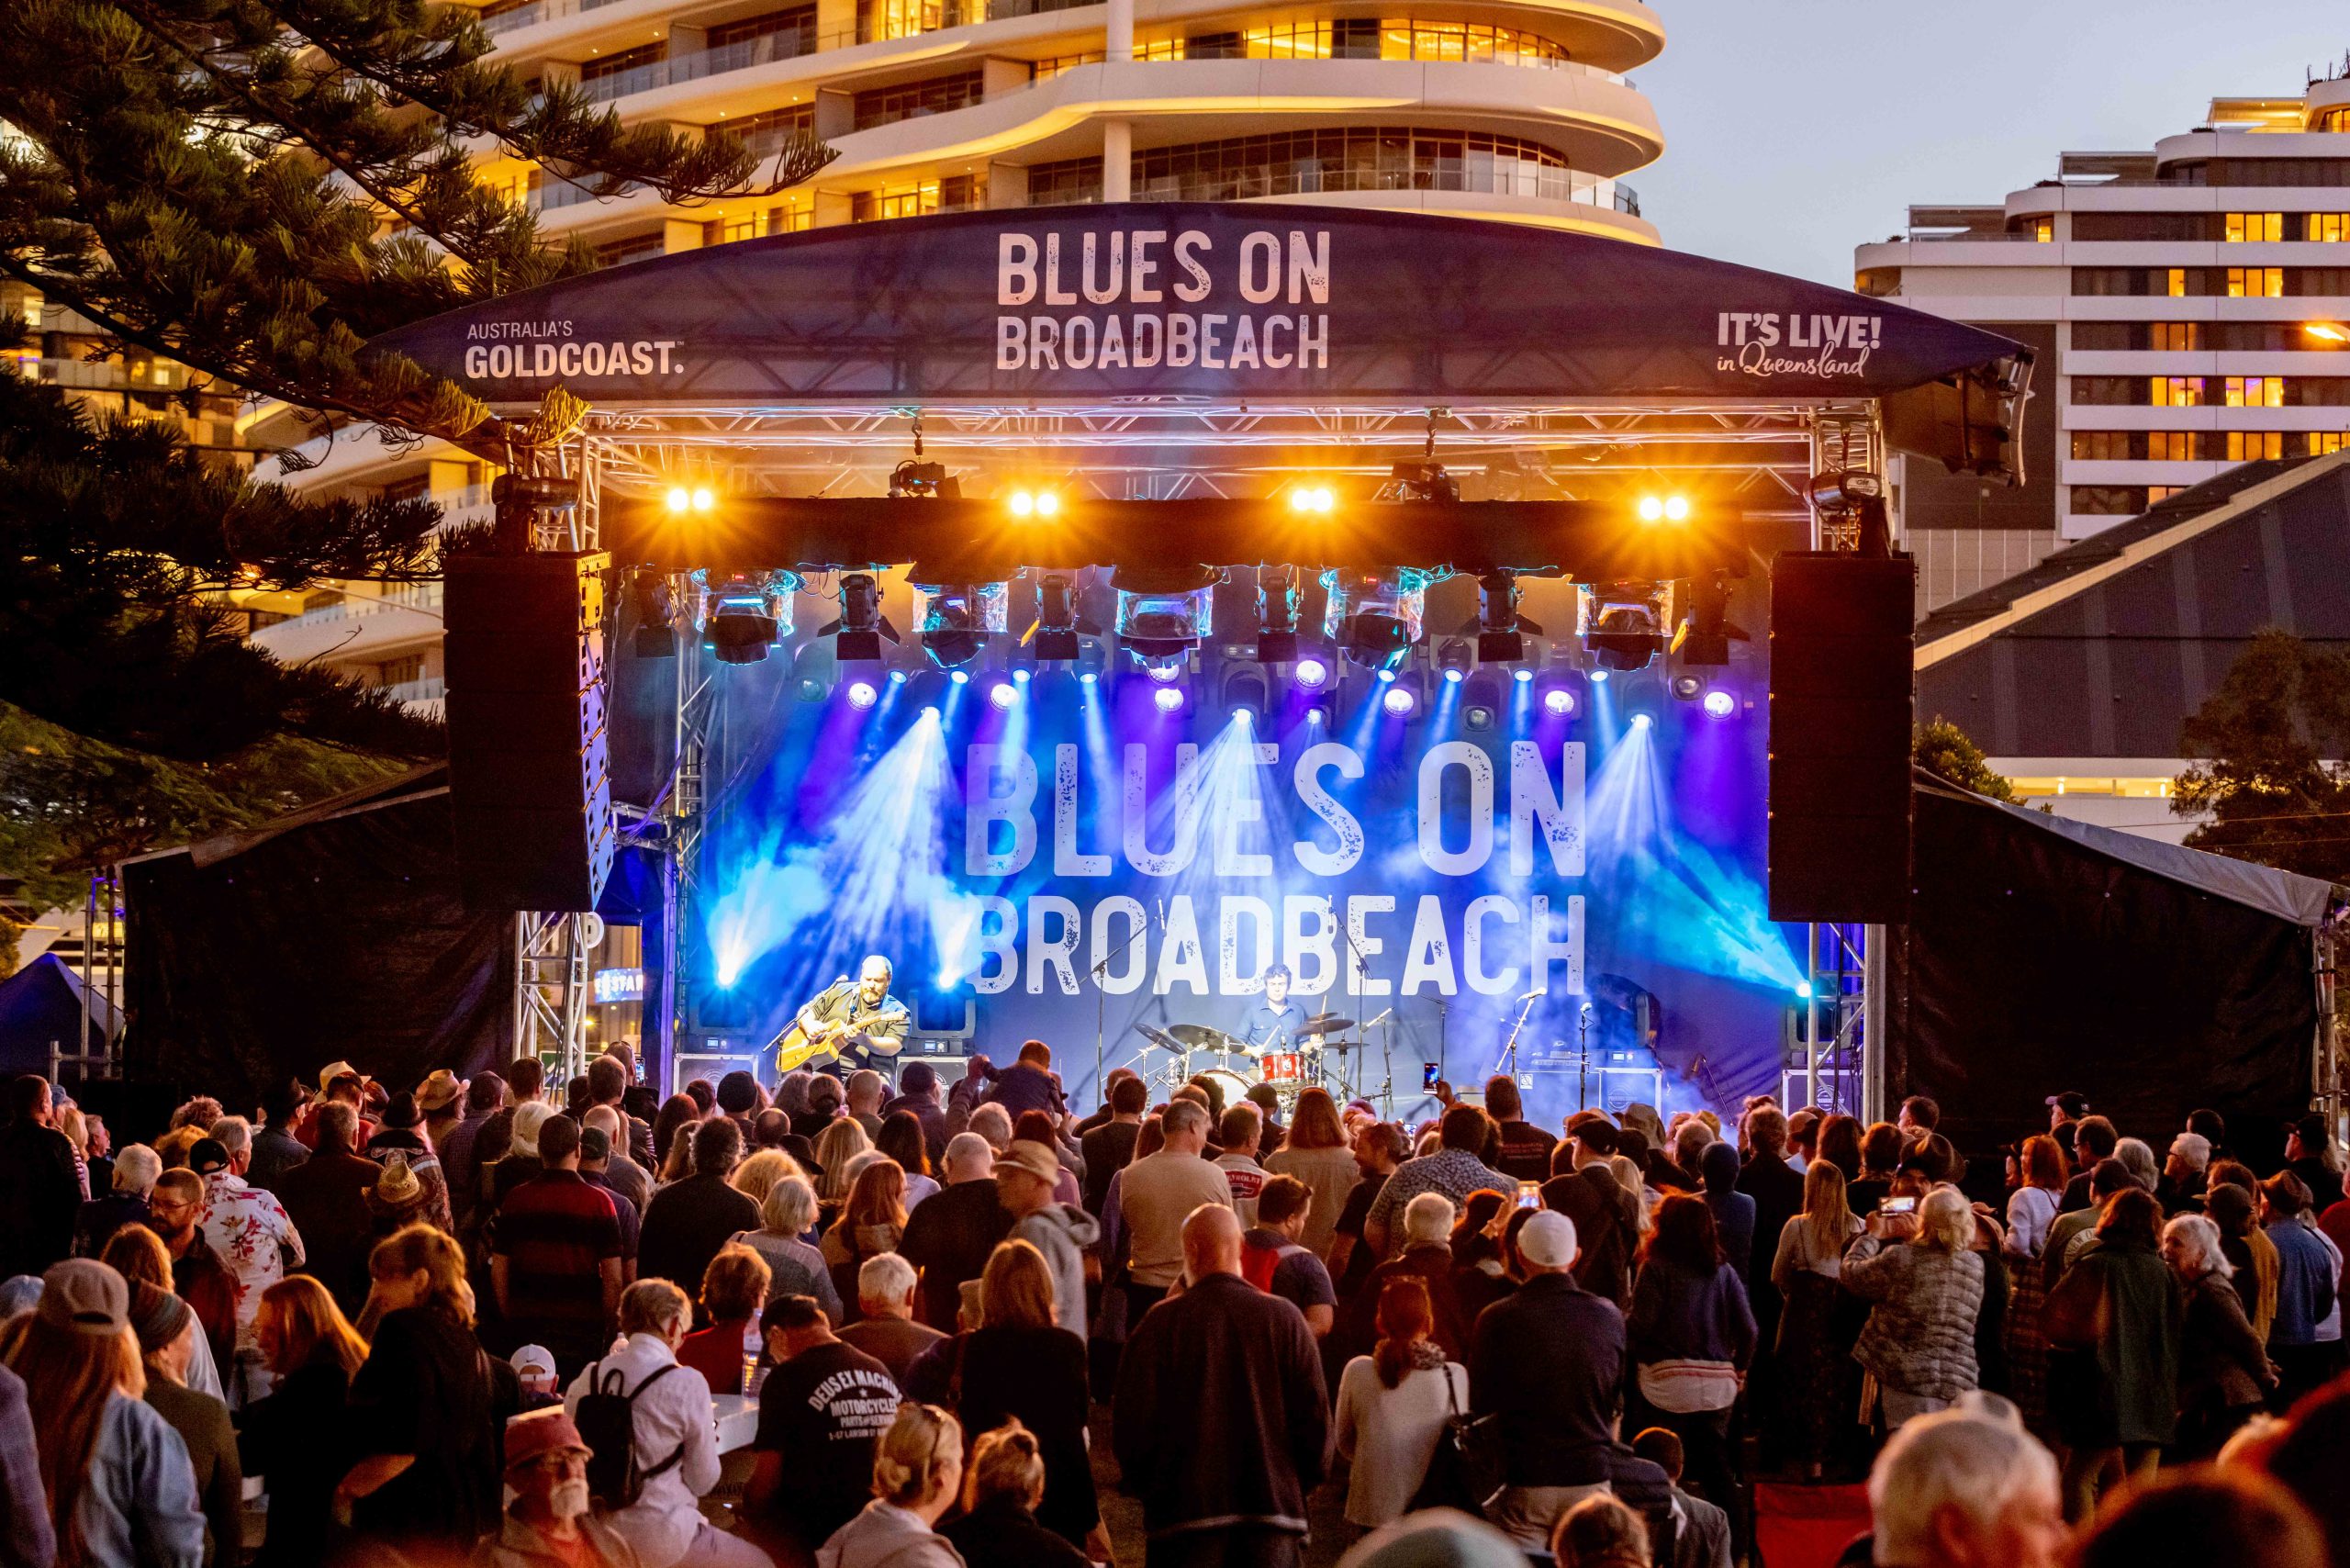 Festival stage with band playing in front of a large crowd under blue stage lights and Blues on Broadbeach backdrop.